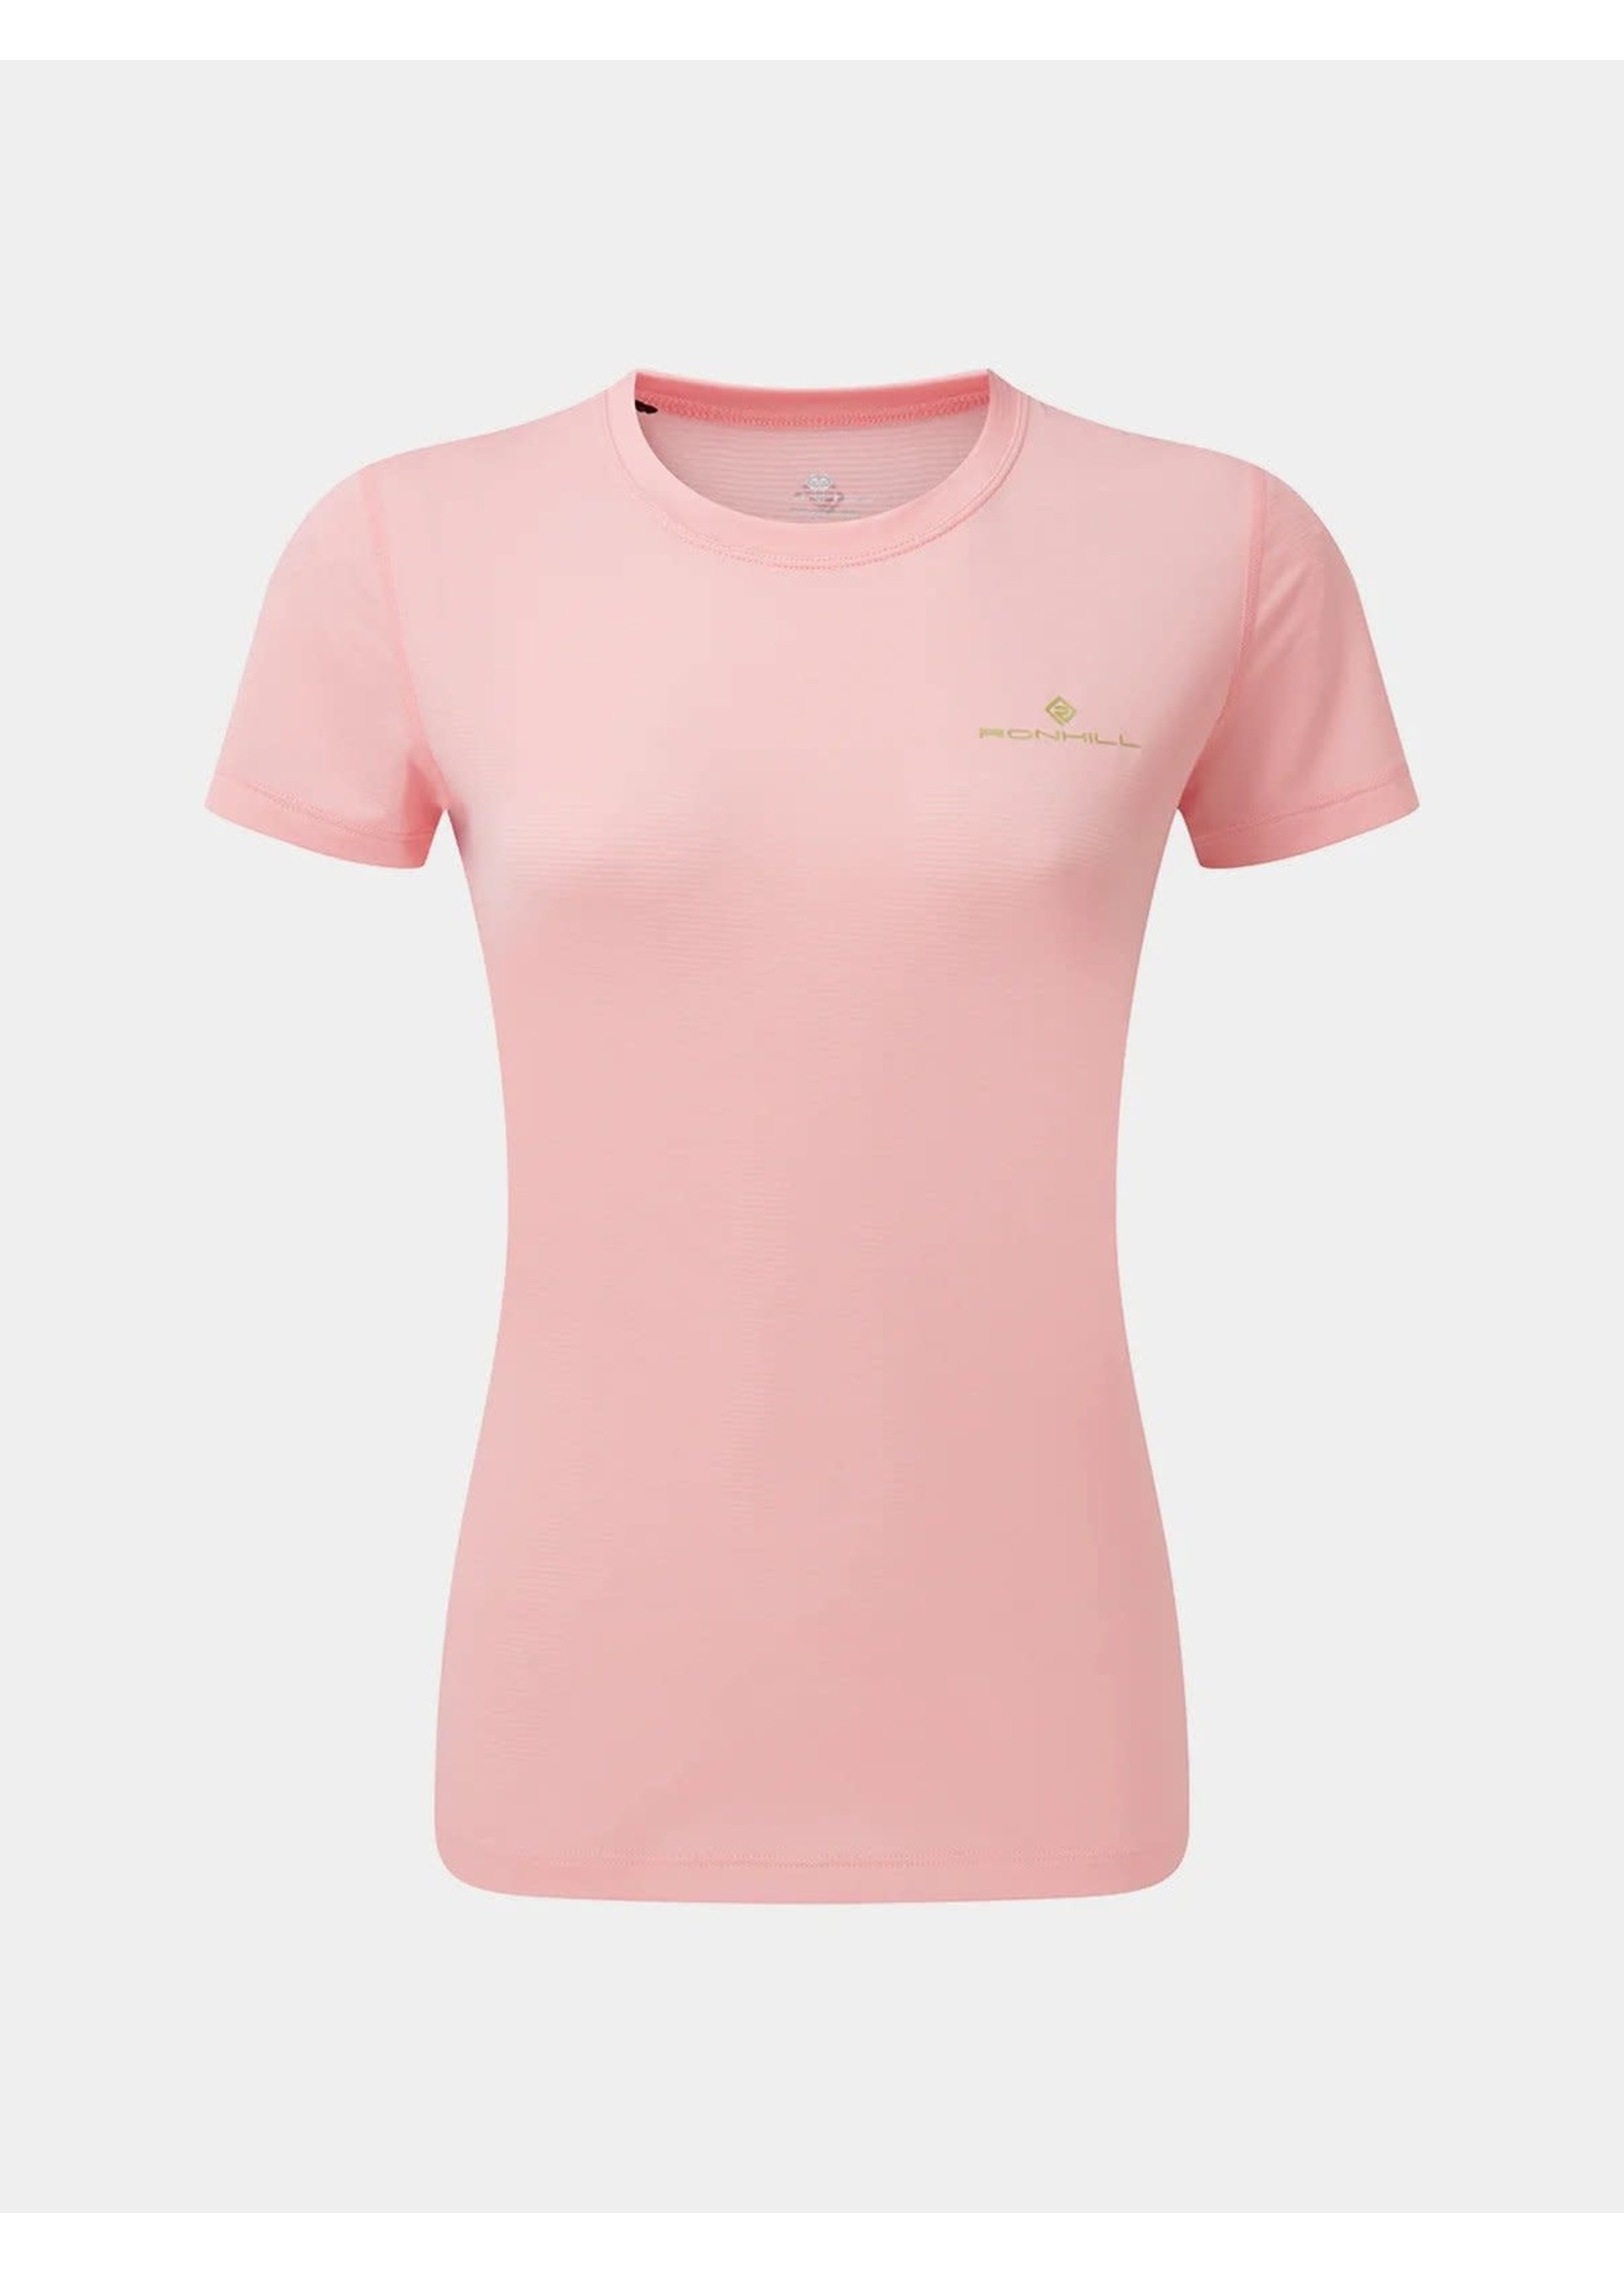 Ronhill Ronhill Tech Ladies S/S Tee (2022)